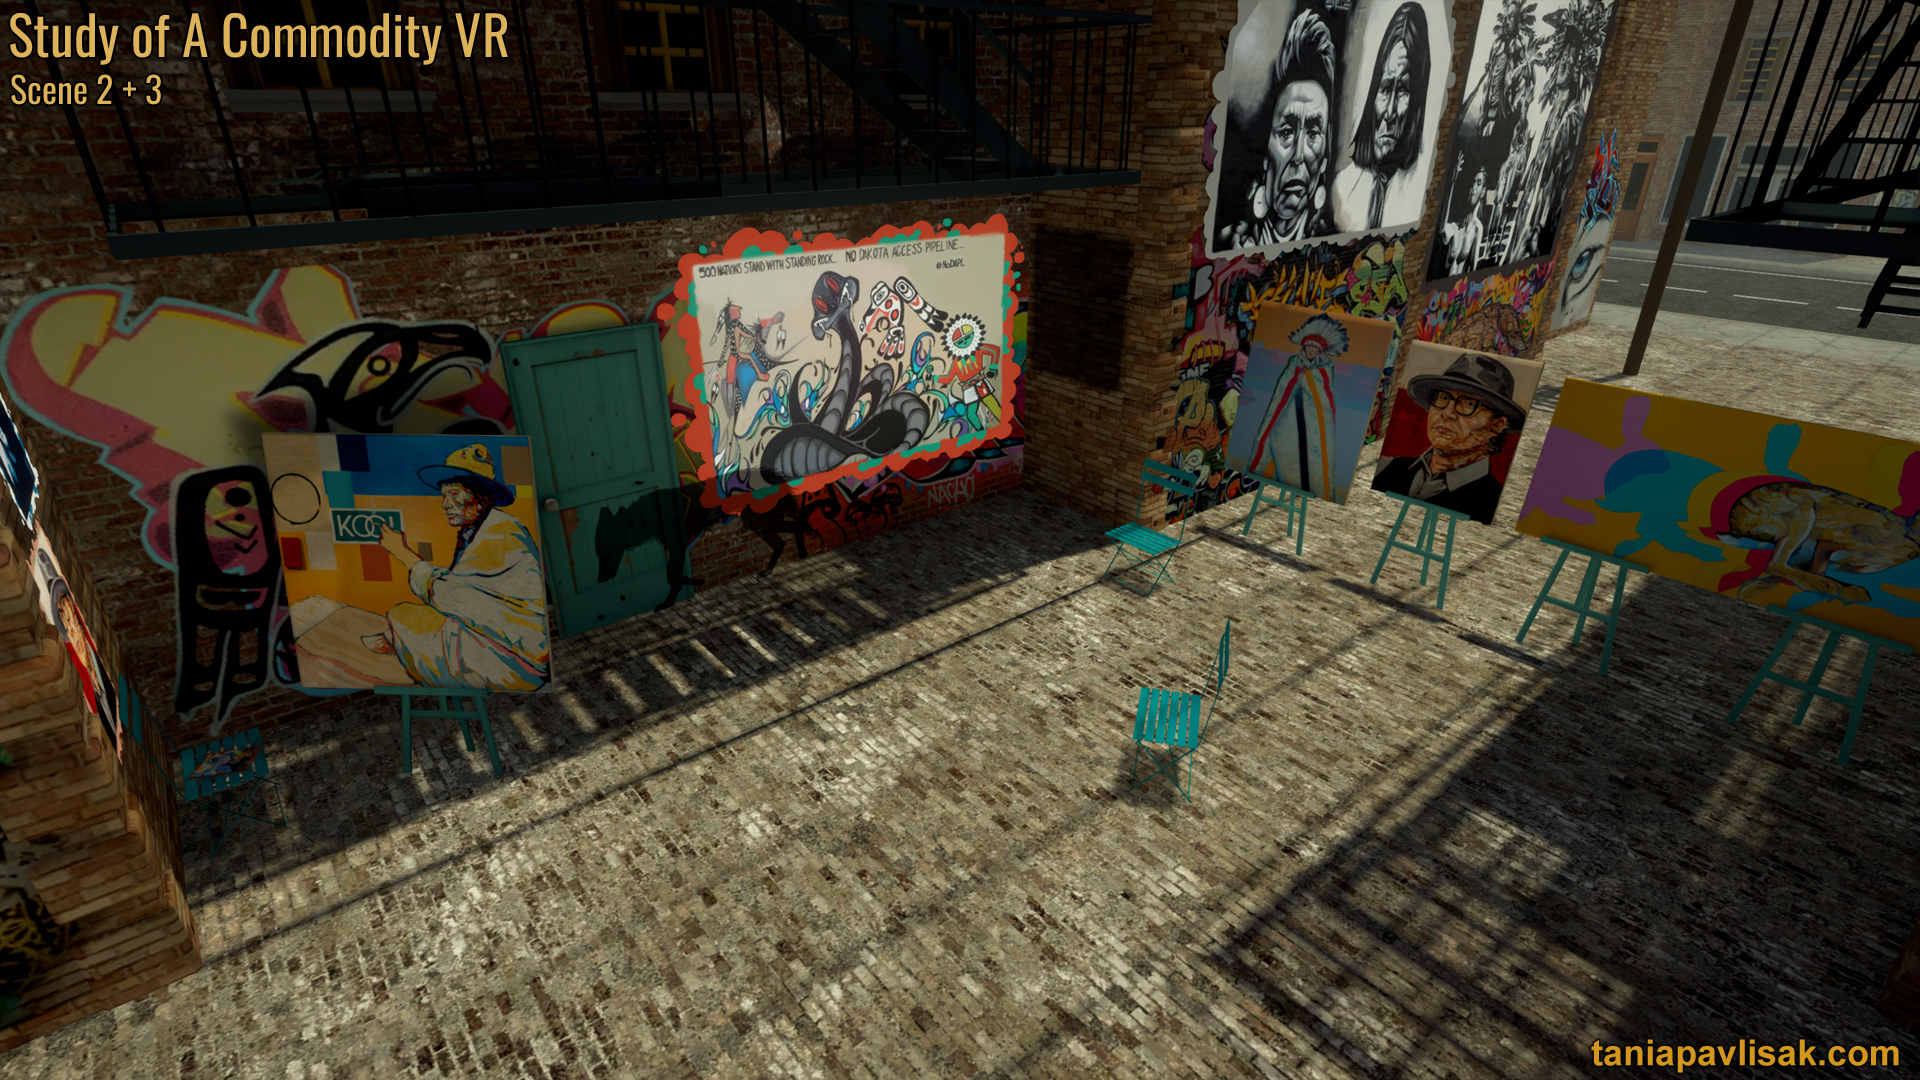 View of an art alley, with street art and a mini-gallery of Louis Still Smoking's artworks, including unfinished Study of a Commodity painting.